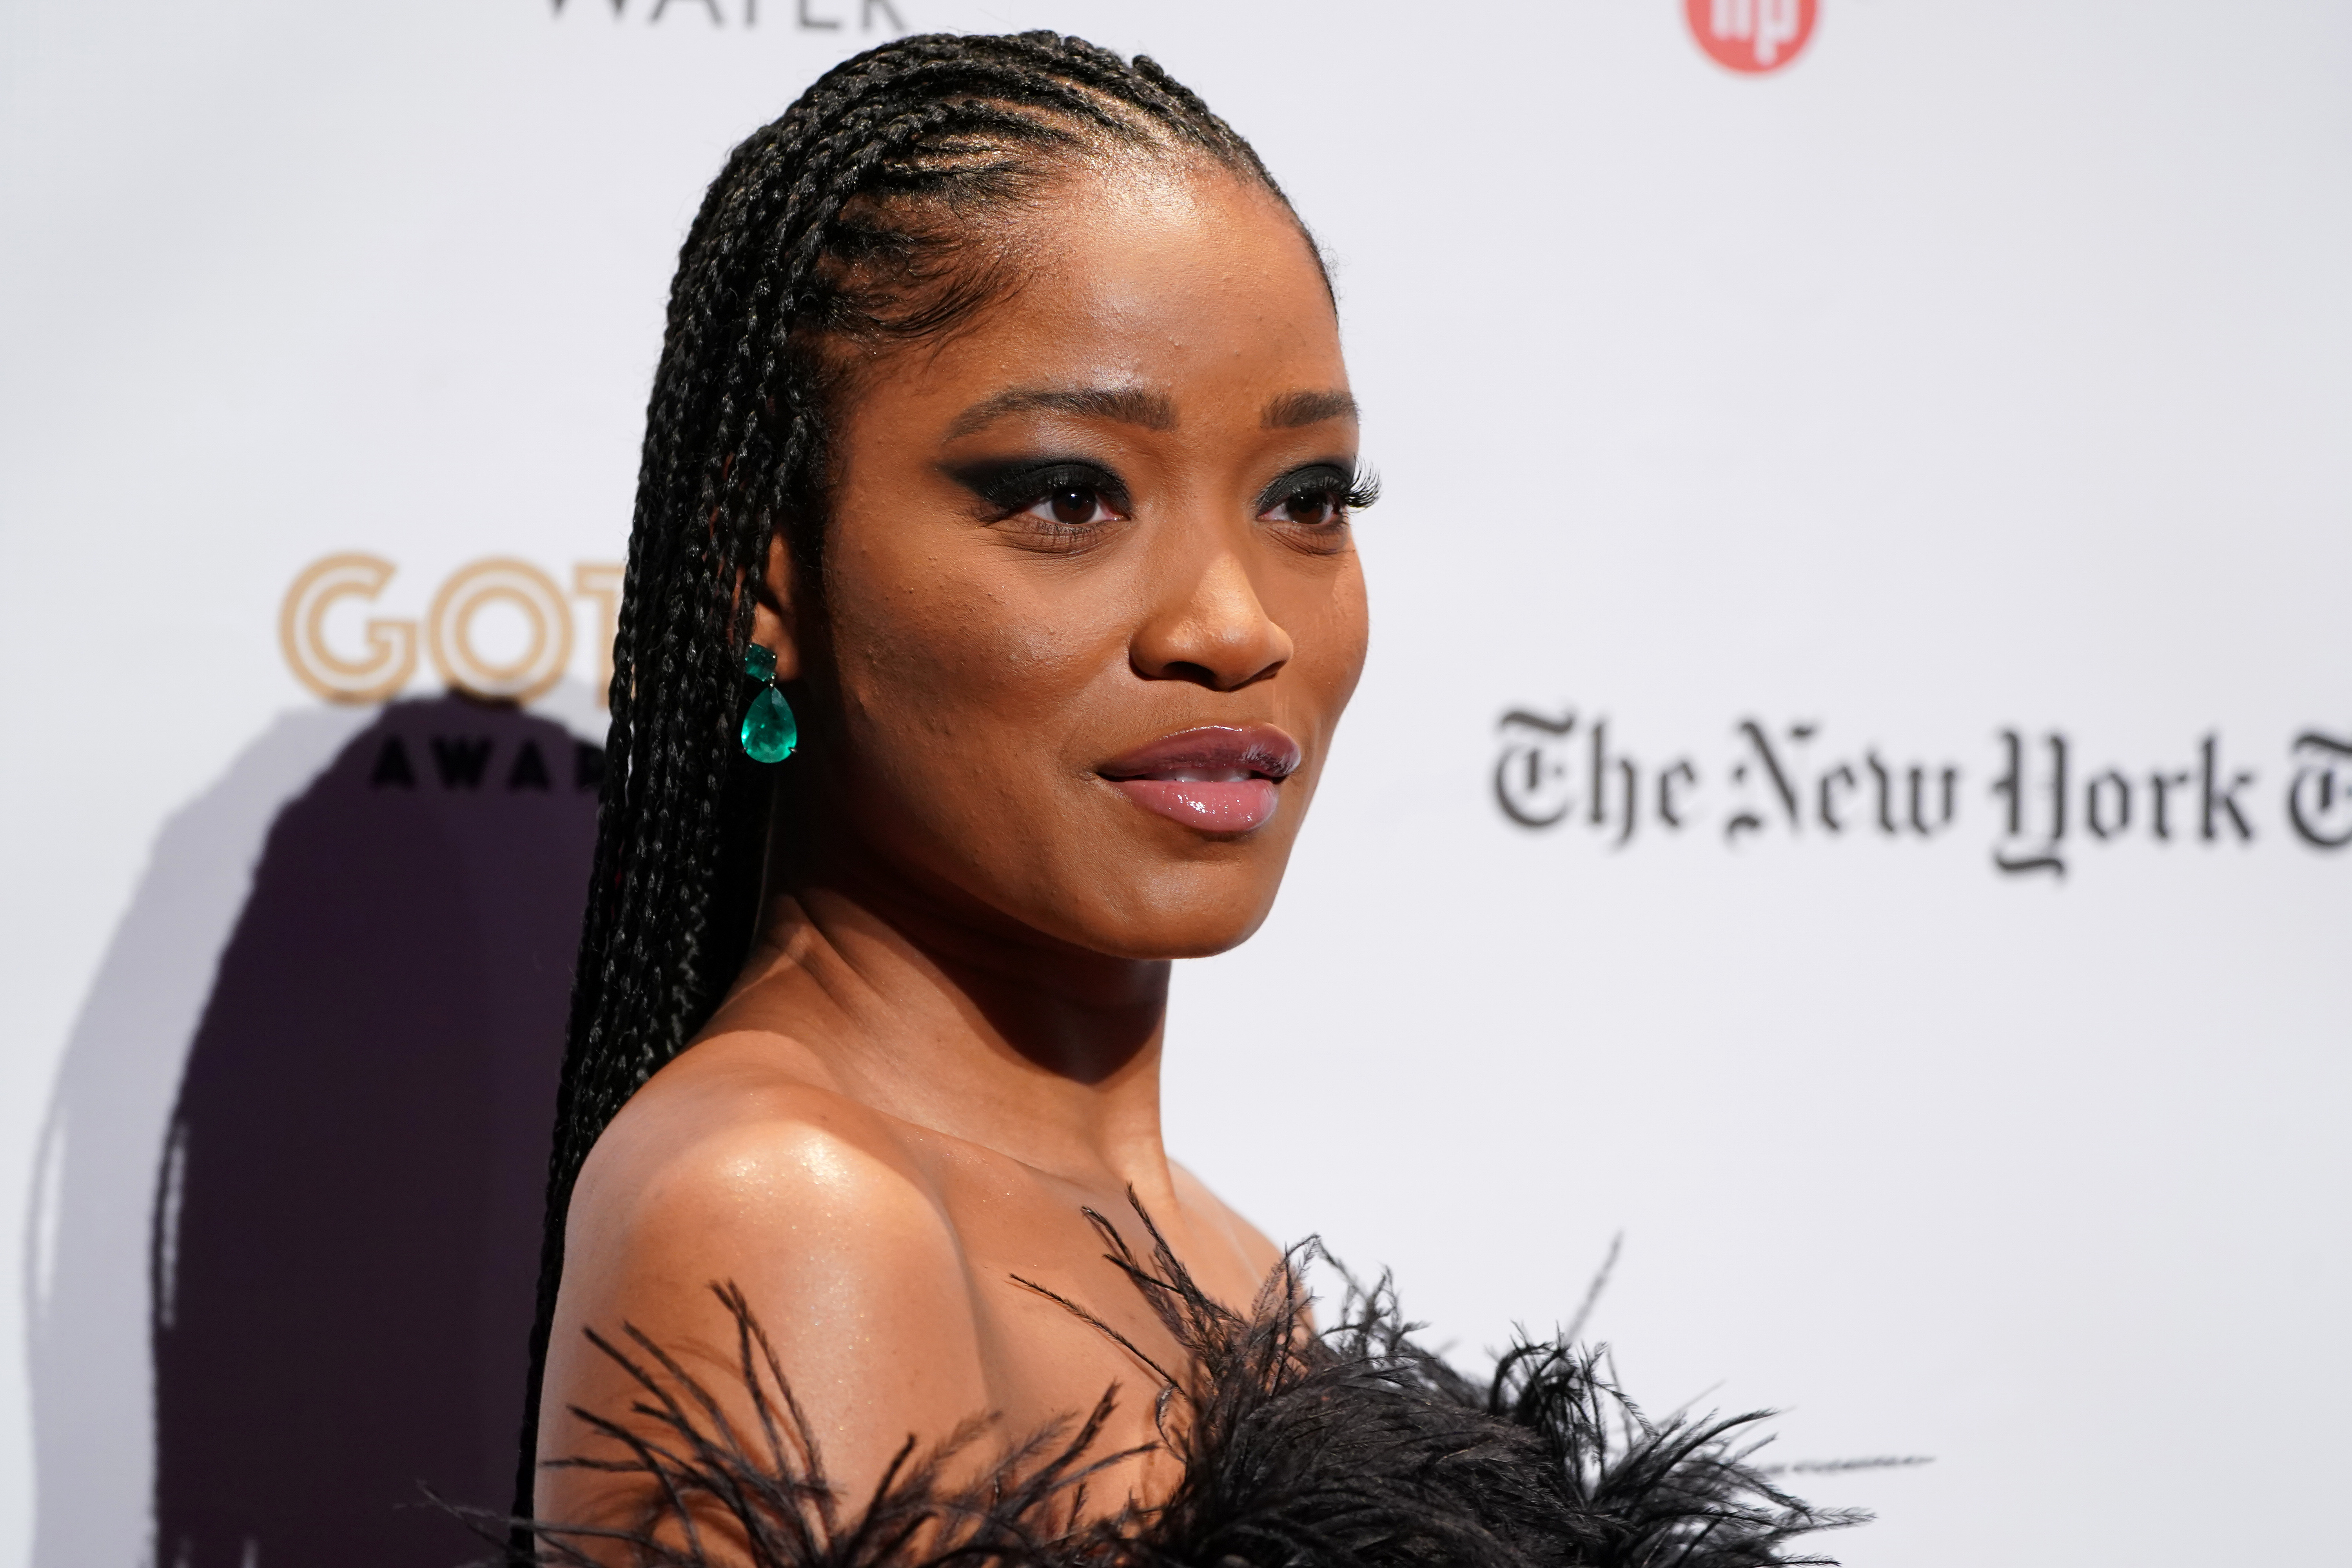 Keke Palmer’s Powerful Message On Consent: “No Means No” Even Outside Of Sex